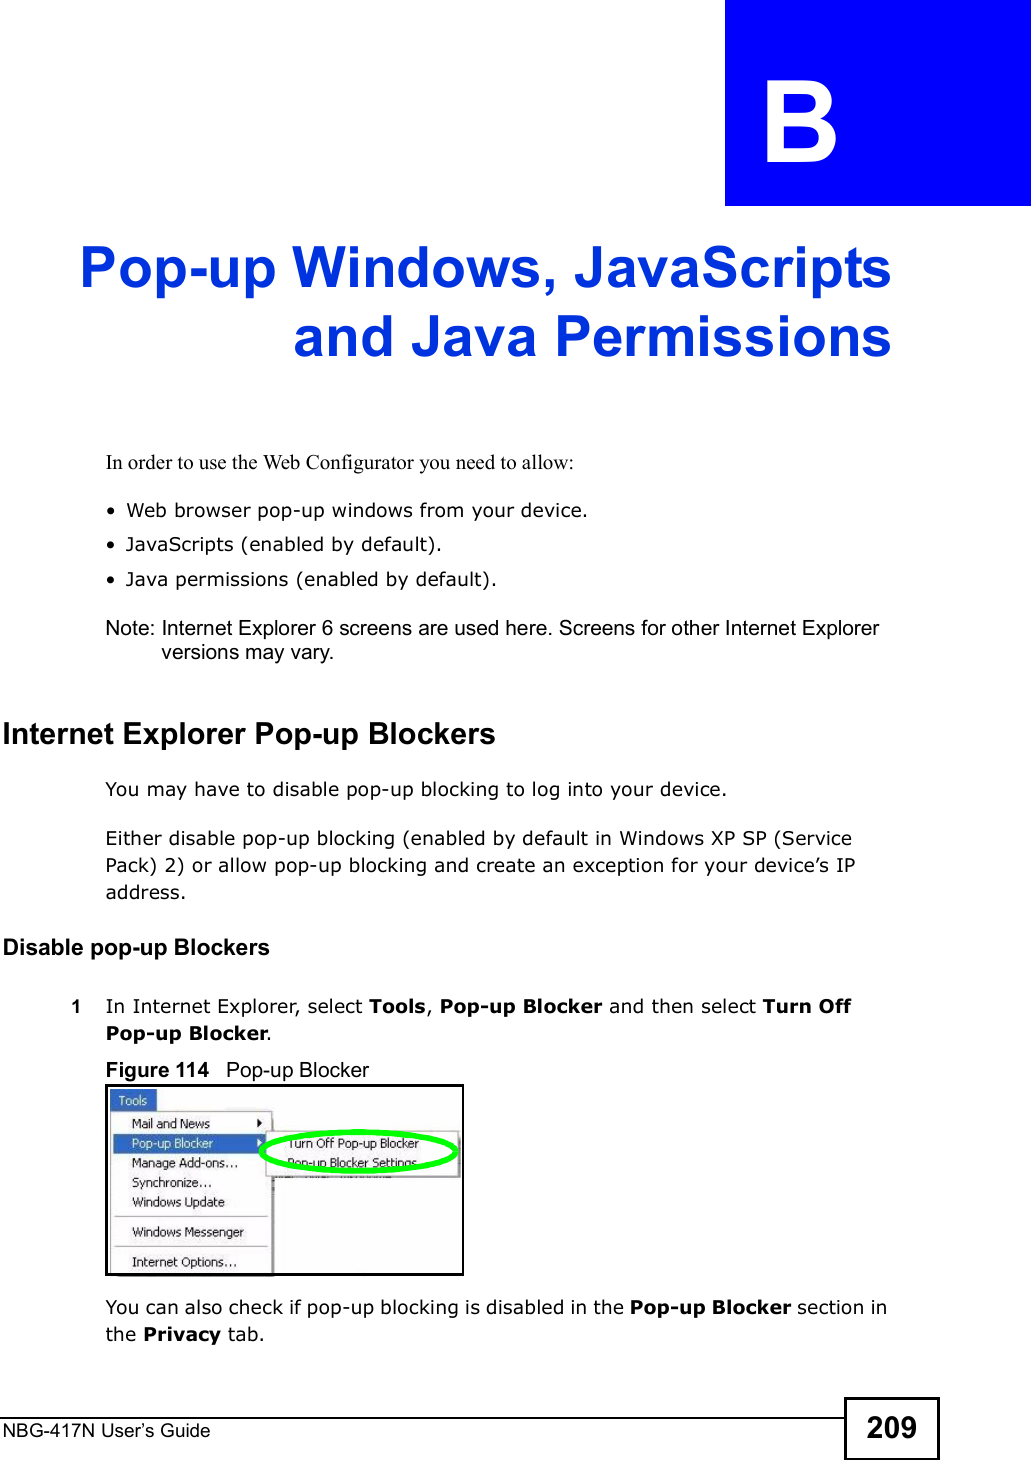 NBG-417N User s Guide 209APPENDIX  B Pop-up Windows, JavaScriptsand Java PermissionsIn order to use the Web Configurator you need to allow: Web browser pop-up windows from your device. JavaScripts (enabled by default). Java permissions (enabled by default).Note: Internet Explorer 6 screens are used here. Screens for other Internet Explorer versions may vary.Internet Explorer Pop-up BlockersYou may have to disable pop-up blocking to log into your device. Either disable pop-up blocking (enabled by default in Windows XP SP (Service Pack) 2) or allow pop-up blocking and create an exception for your device!s IP address.Disable pop-up Blockers1In Internet Explorer, select Tools, Pop-up Blocker and then select Turn Off Pop-up Blocker. Figure 114   Pop-up BlockerYou can also check if pop-up blocking is disabled in the Pop-up Blocker section in the Privacy tab. 